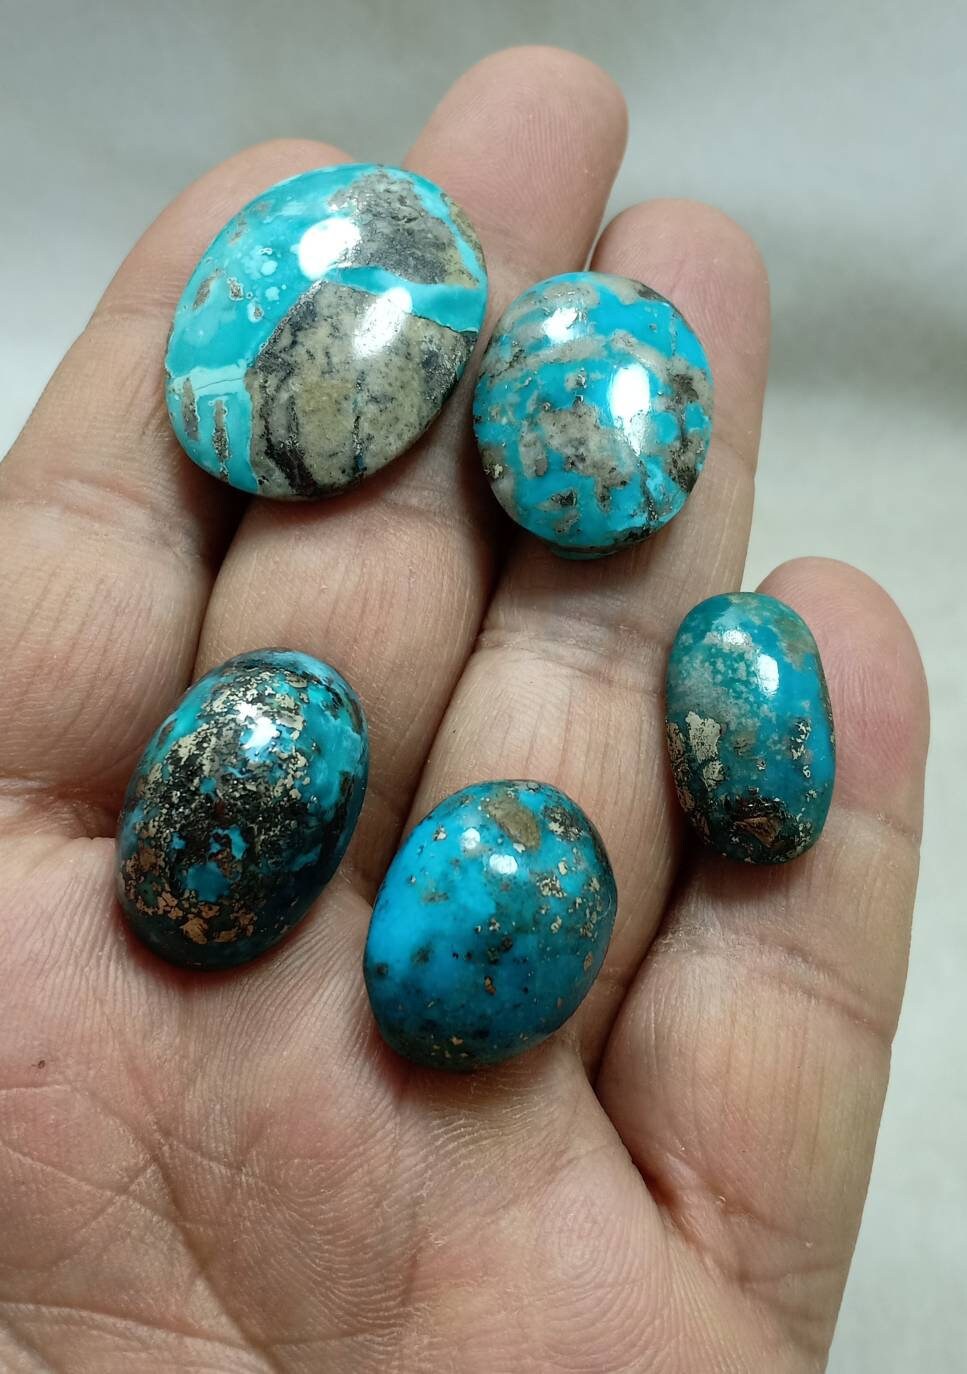 An amazing lot of 5 turquoise with Pyrite Cabochons total 32 grams